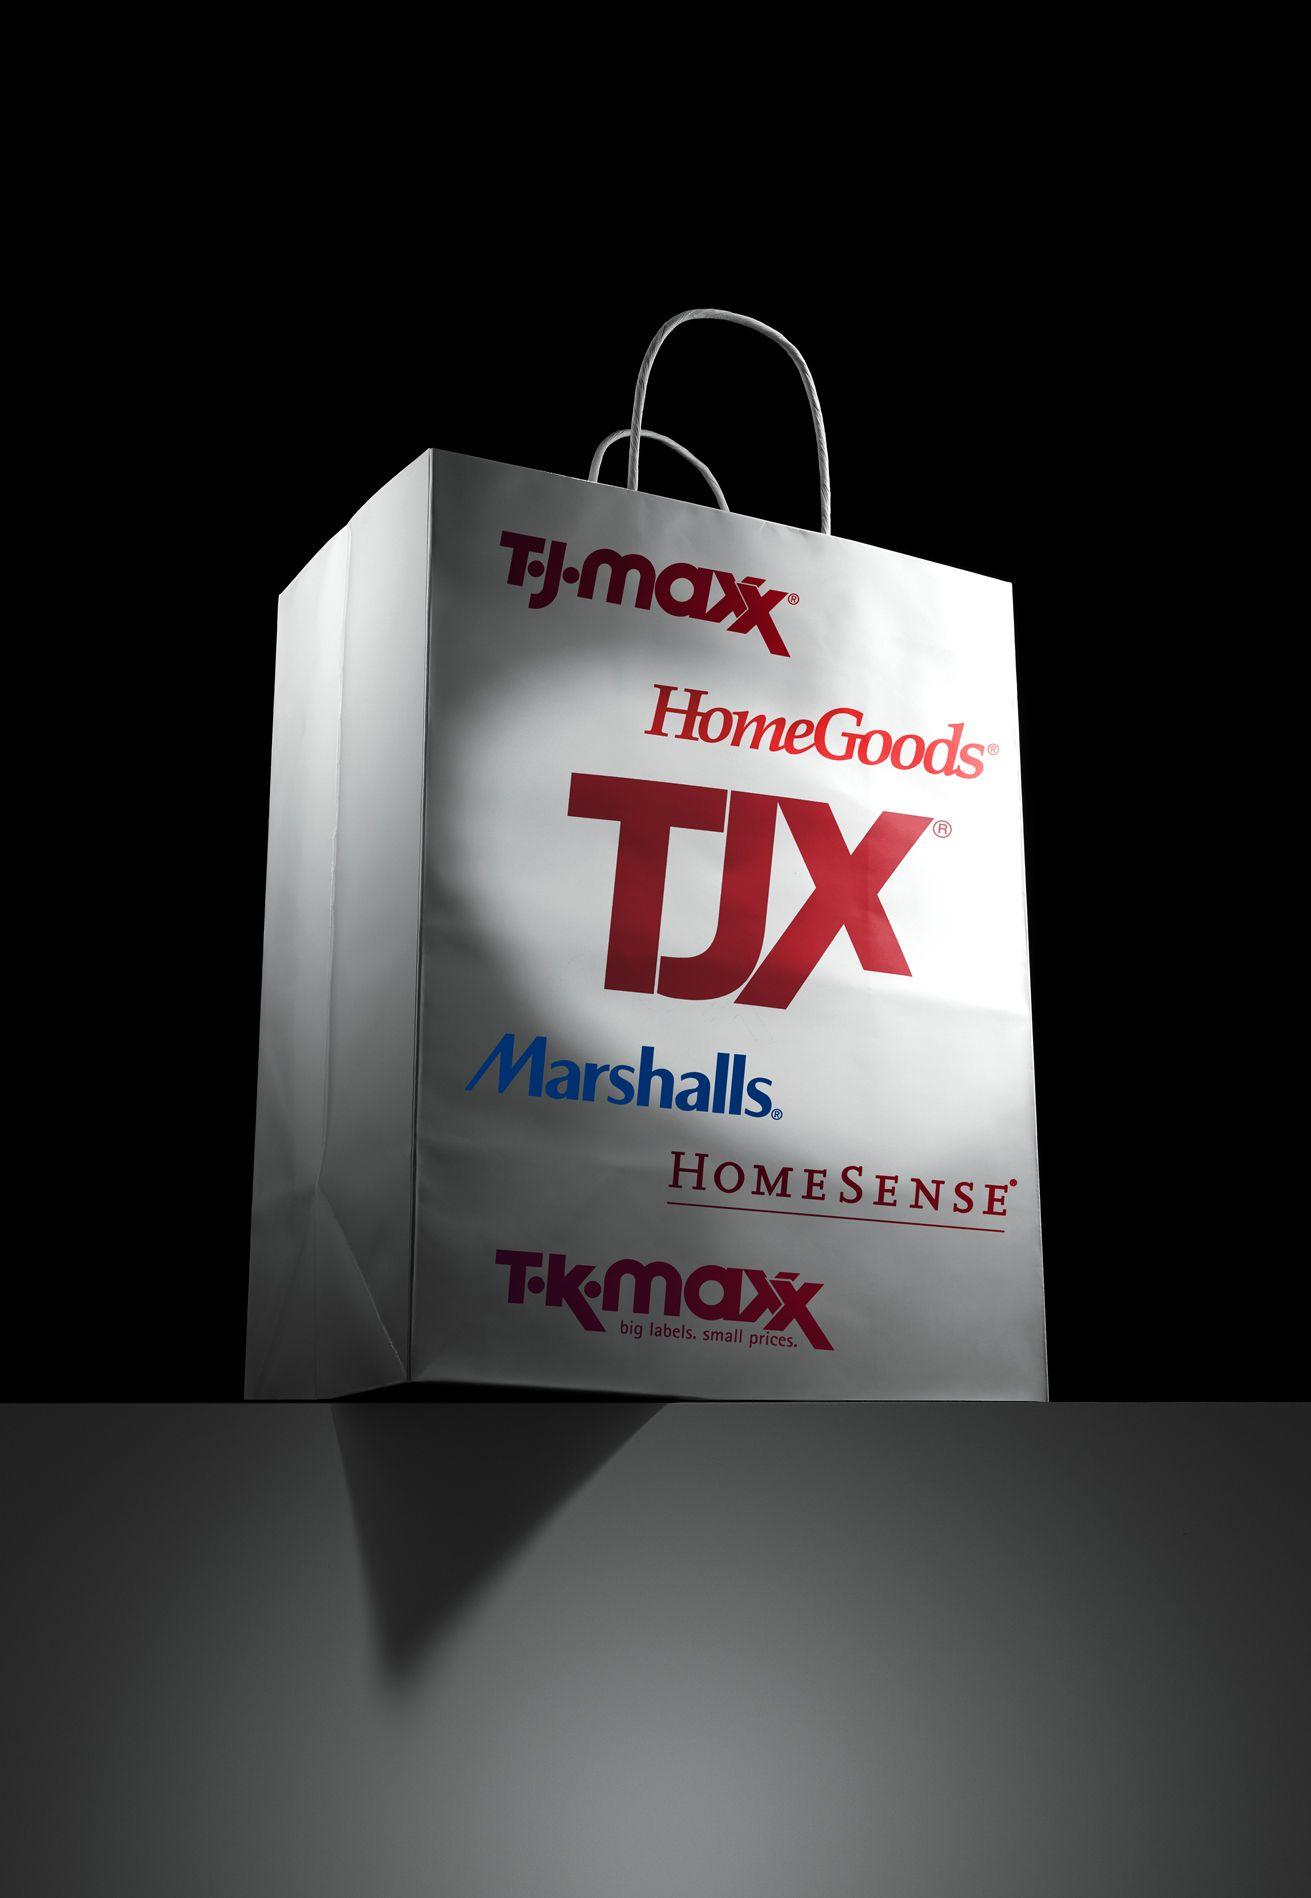 TJ Maxx Logo - Is T.J. Maxx the best retail store in the land? | Fortune